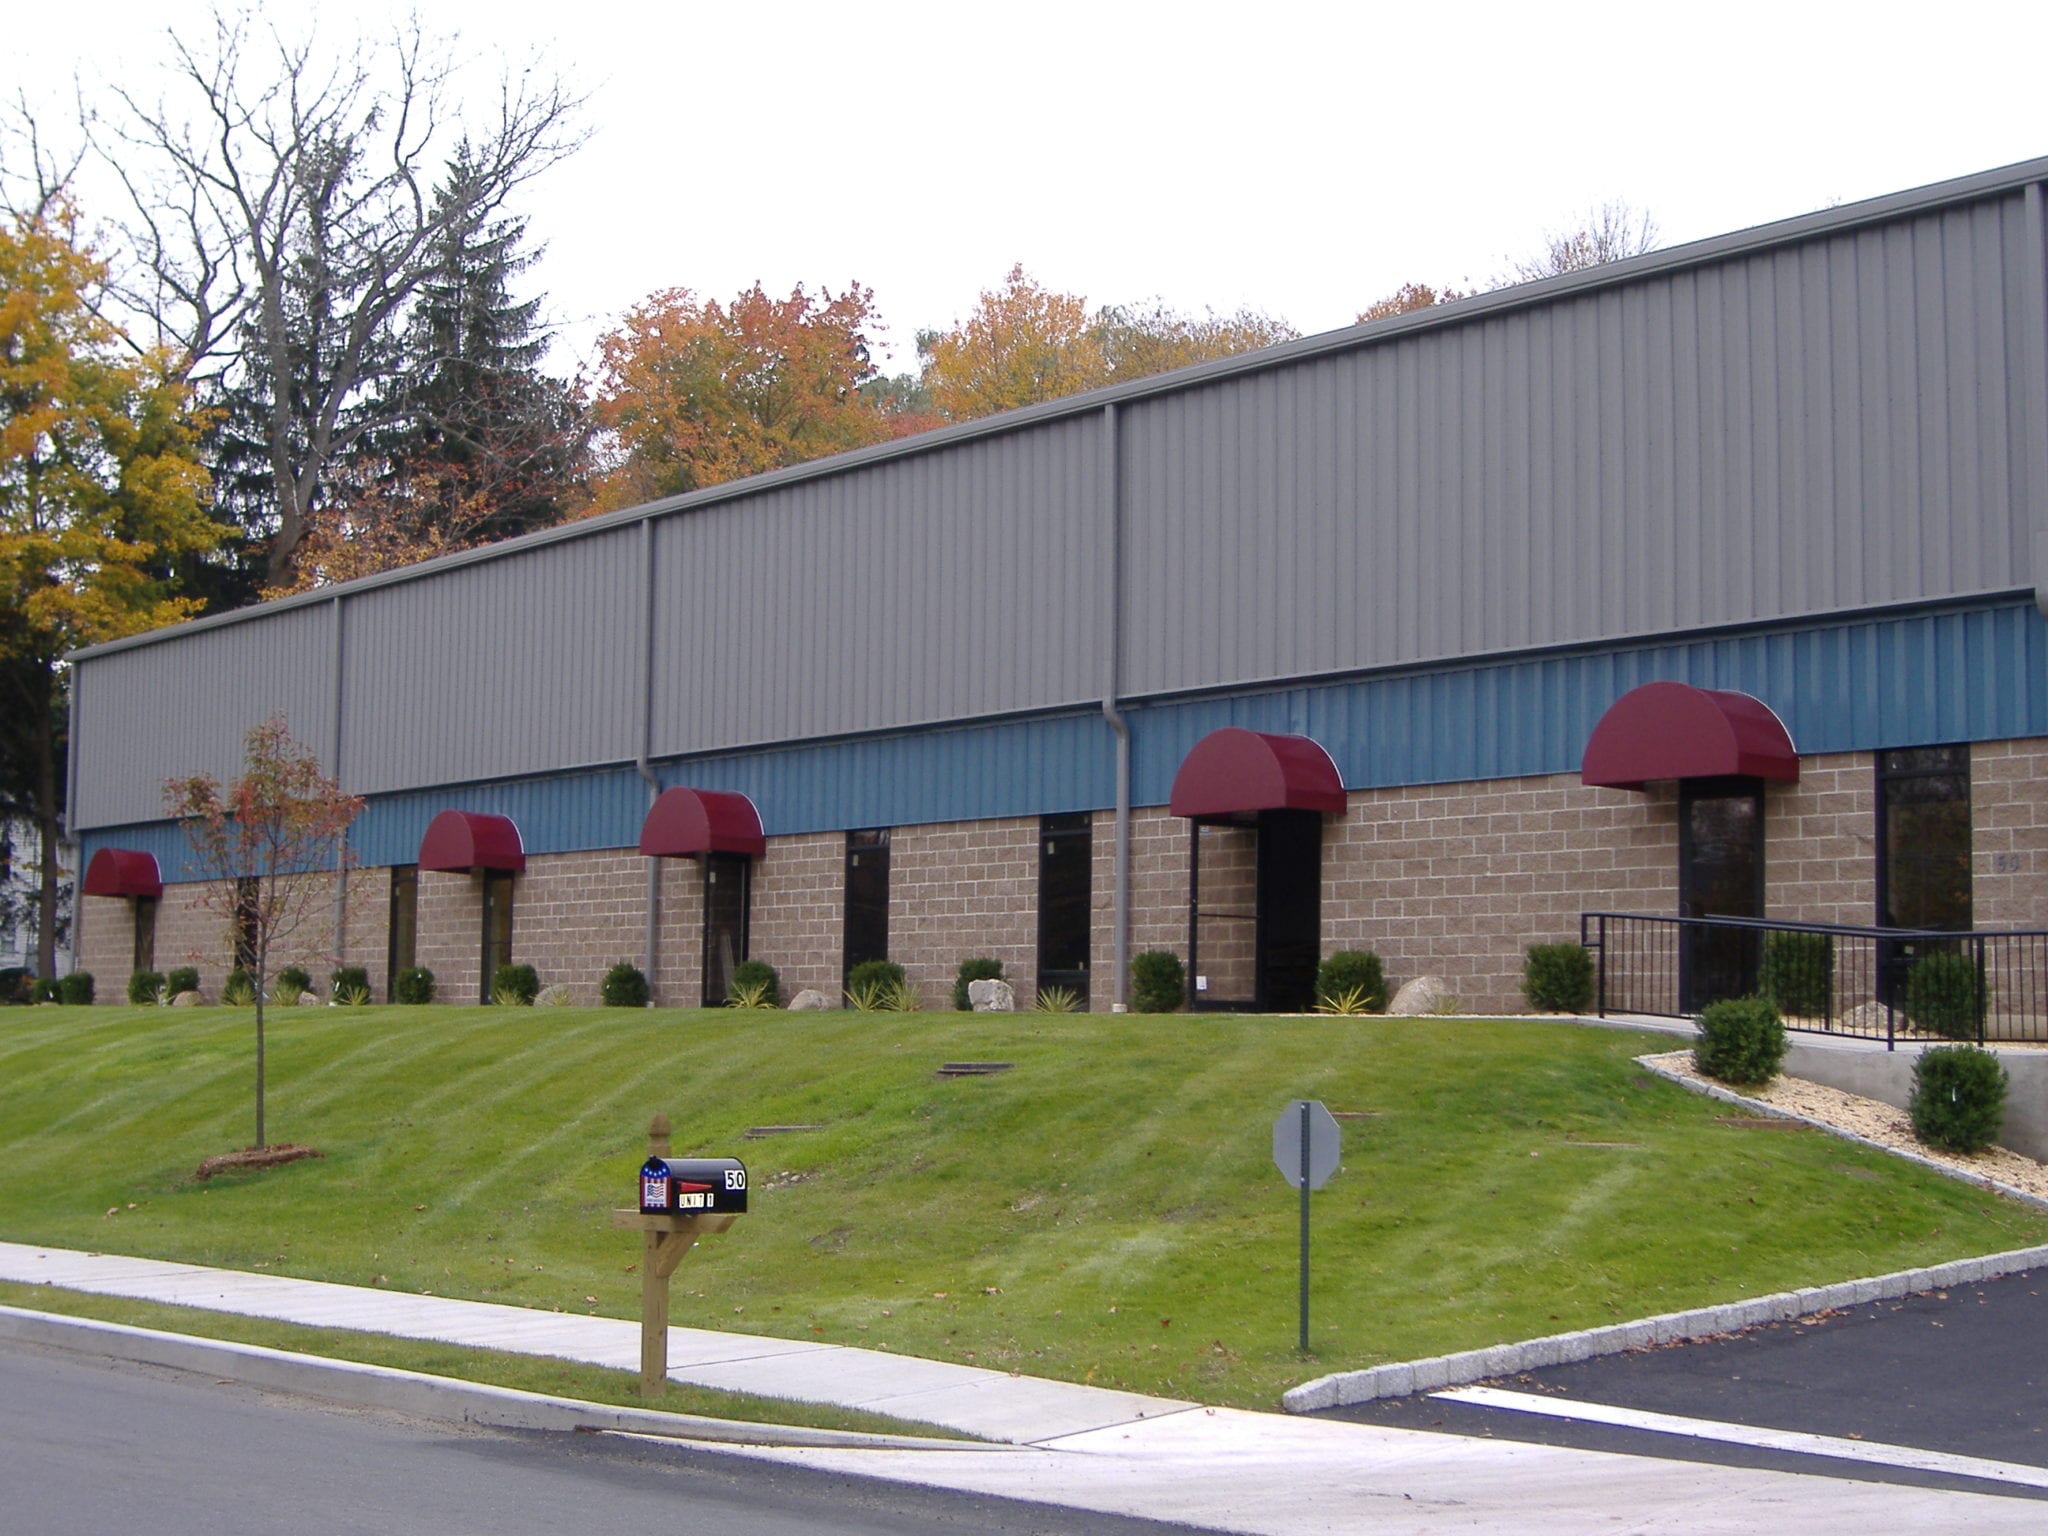 Commercial Awnings In Greater Danbury Ct Store Front Canopies Stamford Ridgefield